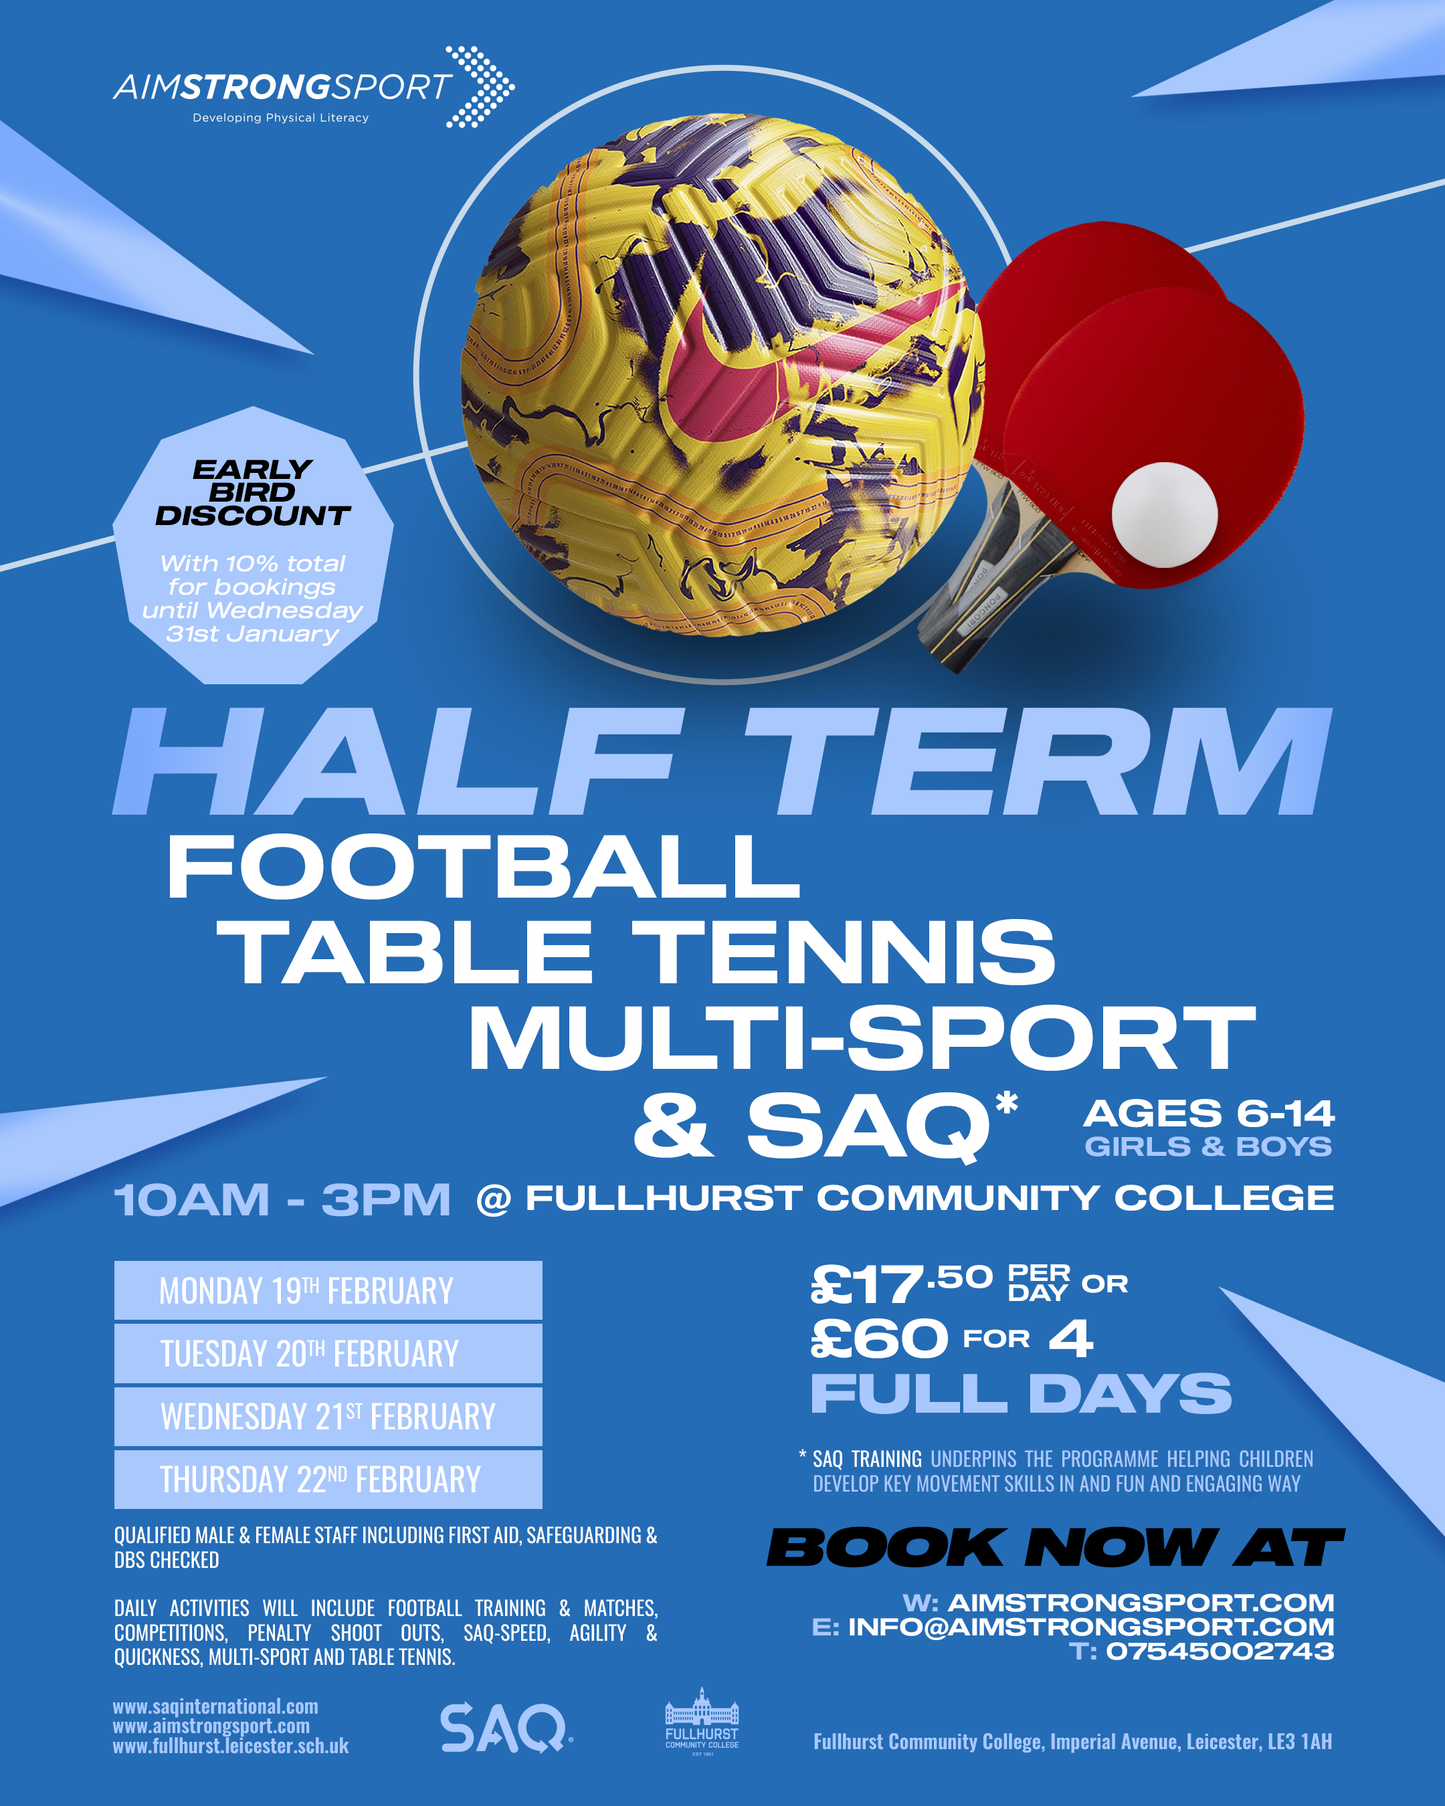 February Half Term Football Table Tennis and SAQ, Ages 6-14, Girls & Boys, 10am-3pm @Fullhurst Community College